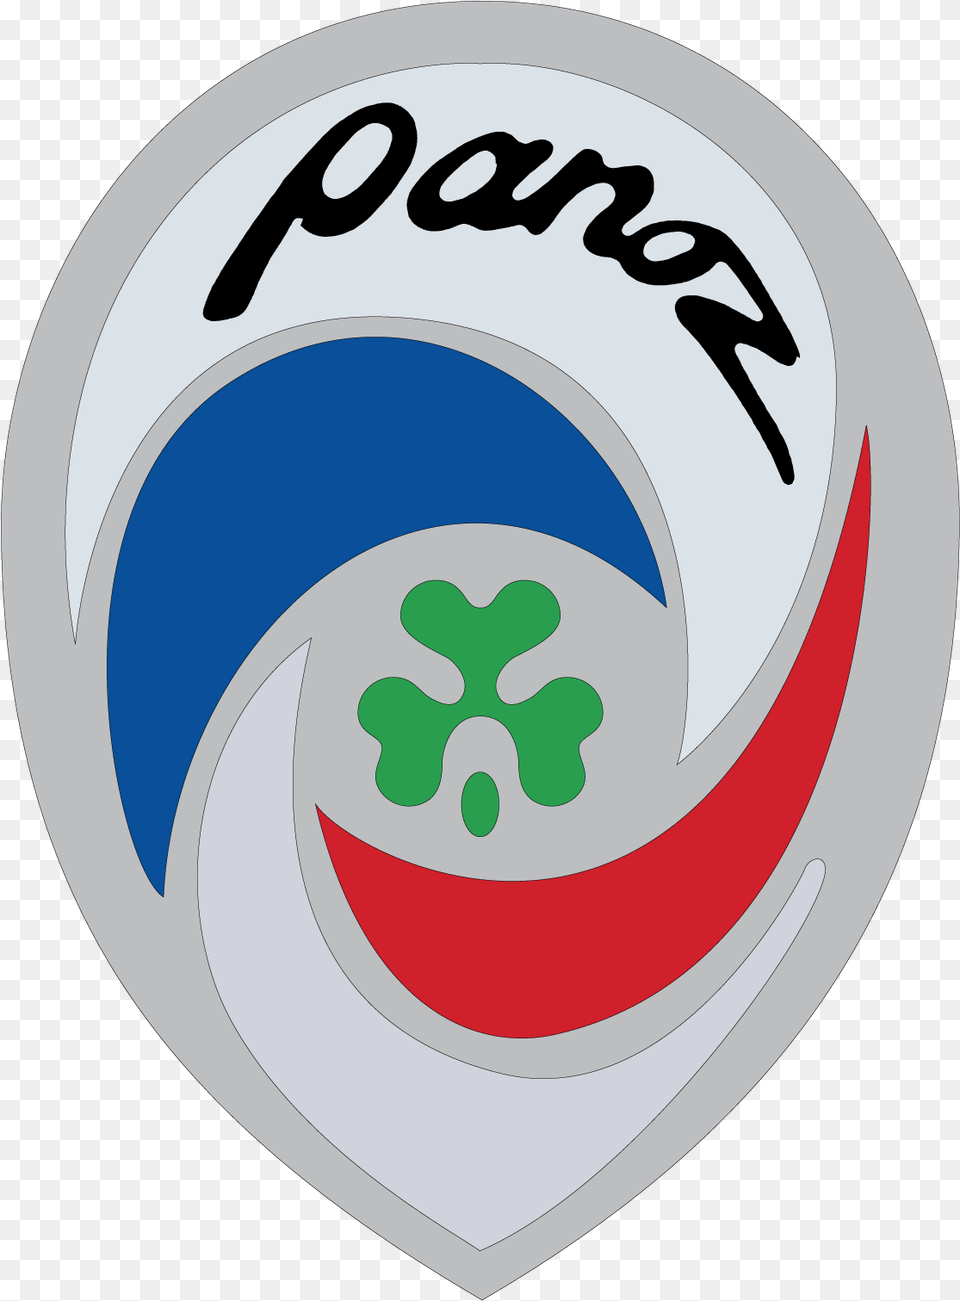 Panoz Logo Meaning And History Symbol Emblem, Disk Free Transparent Png